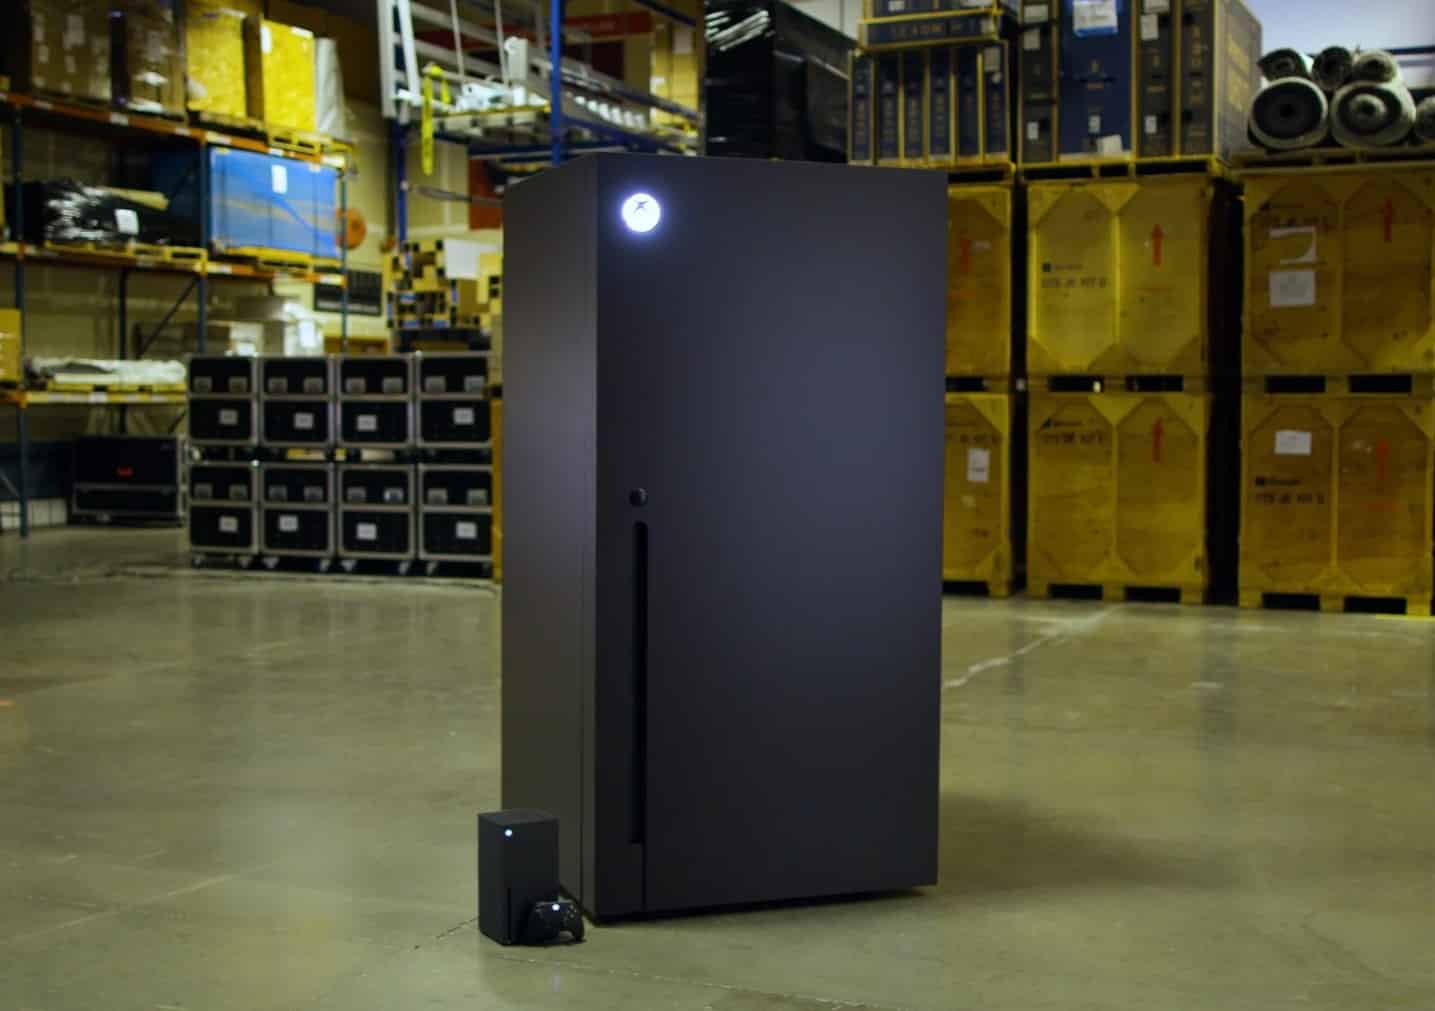 The Xbox Series X fridge is real once again but mini this time